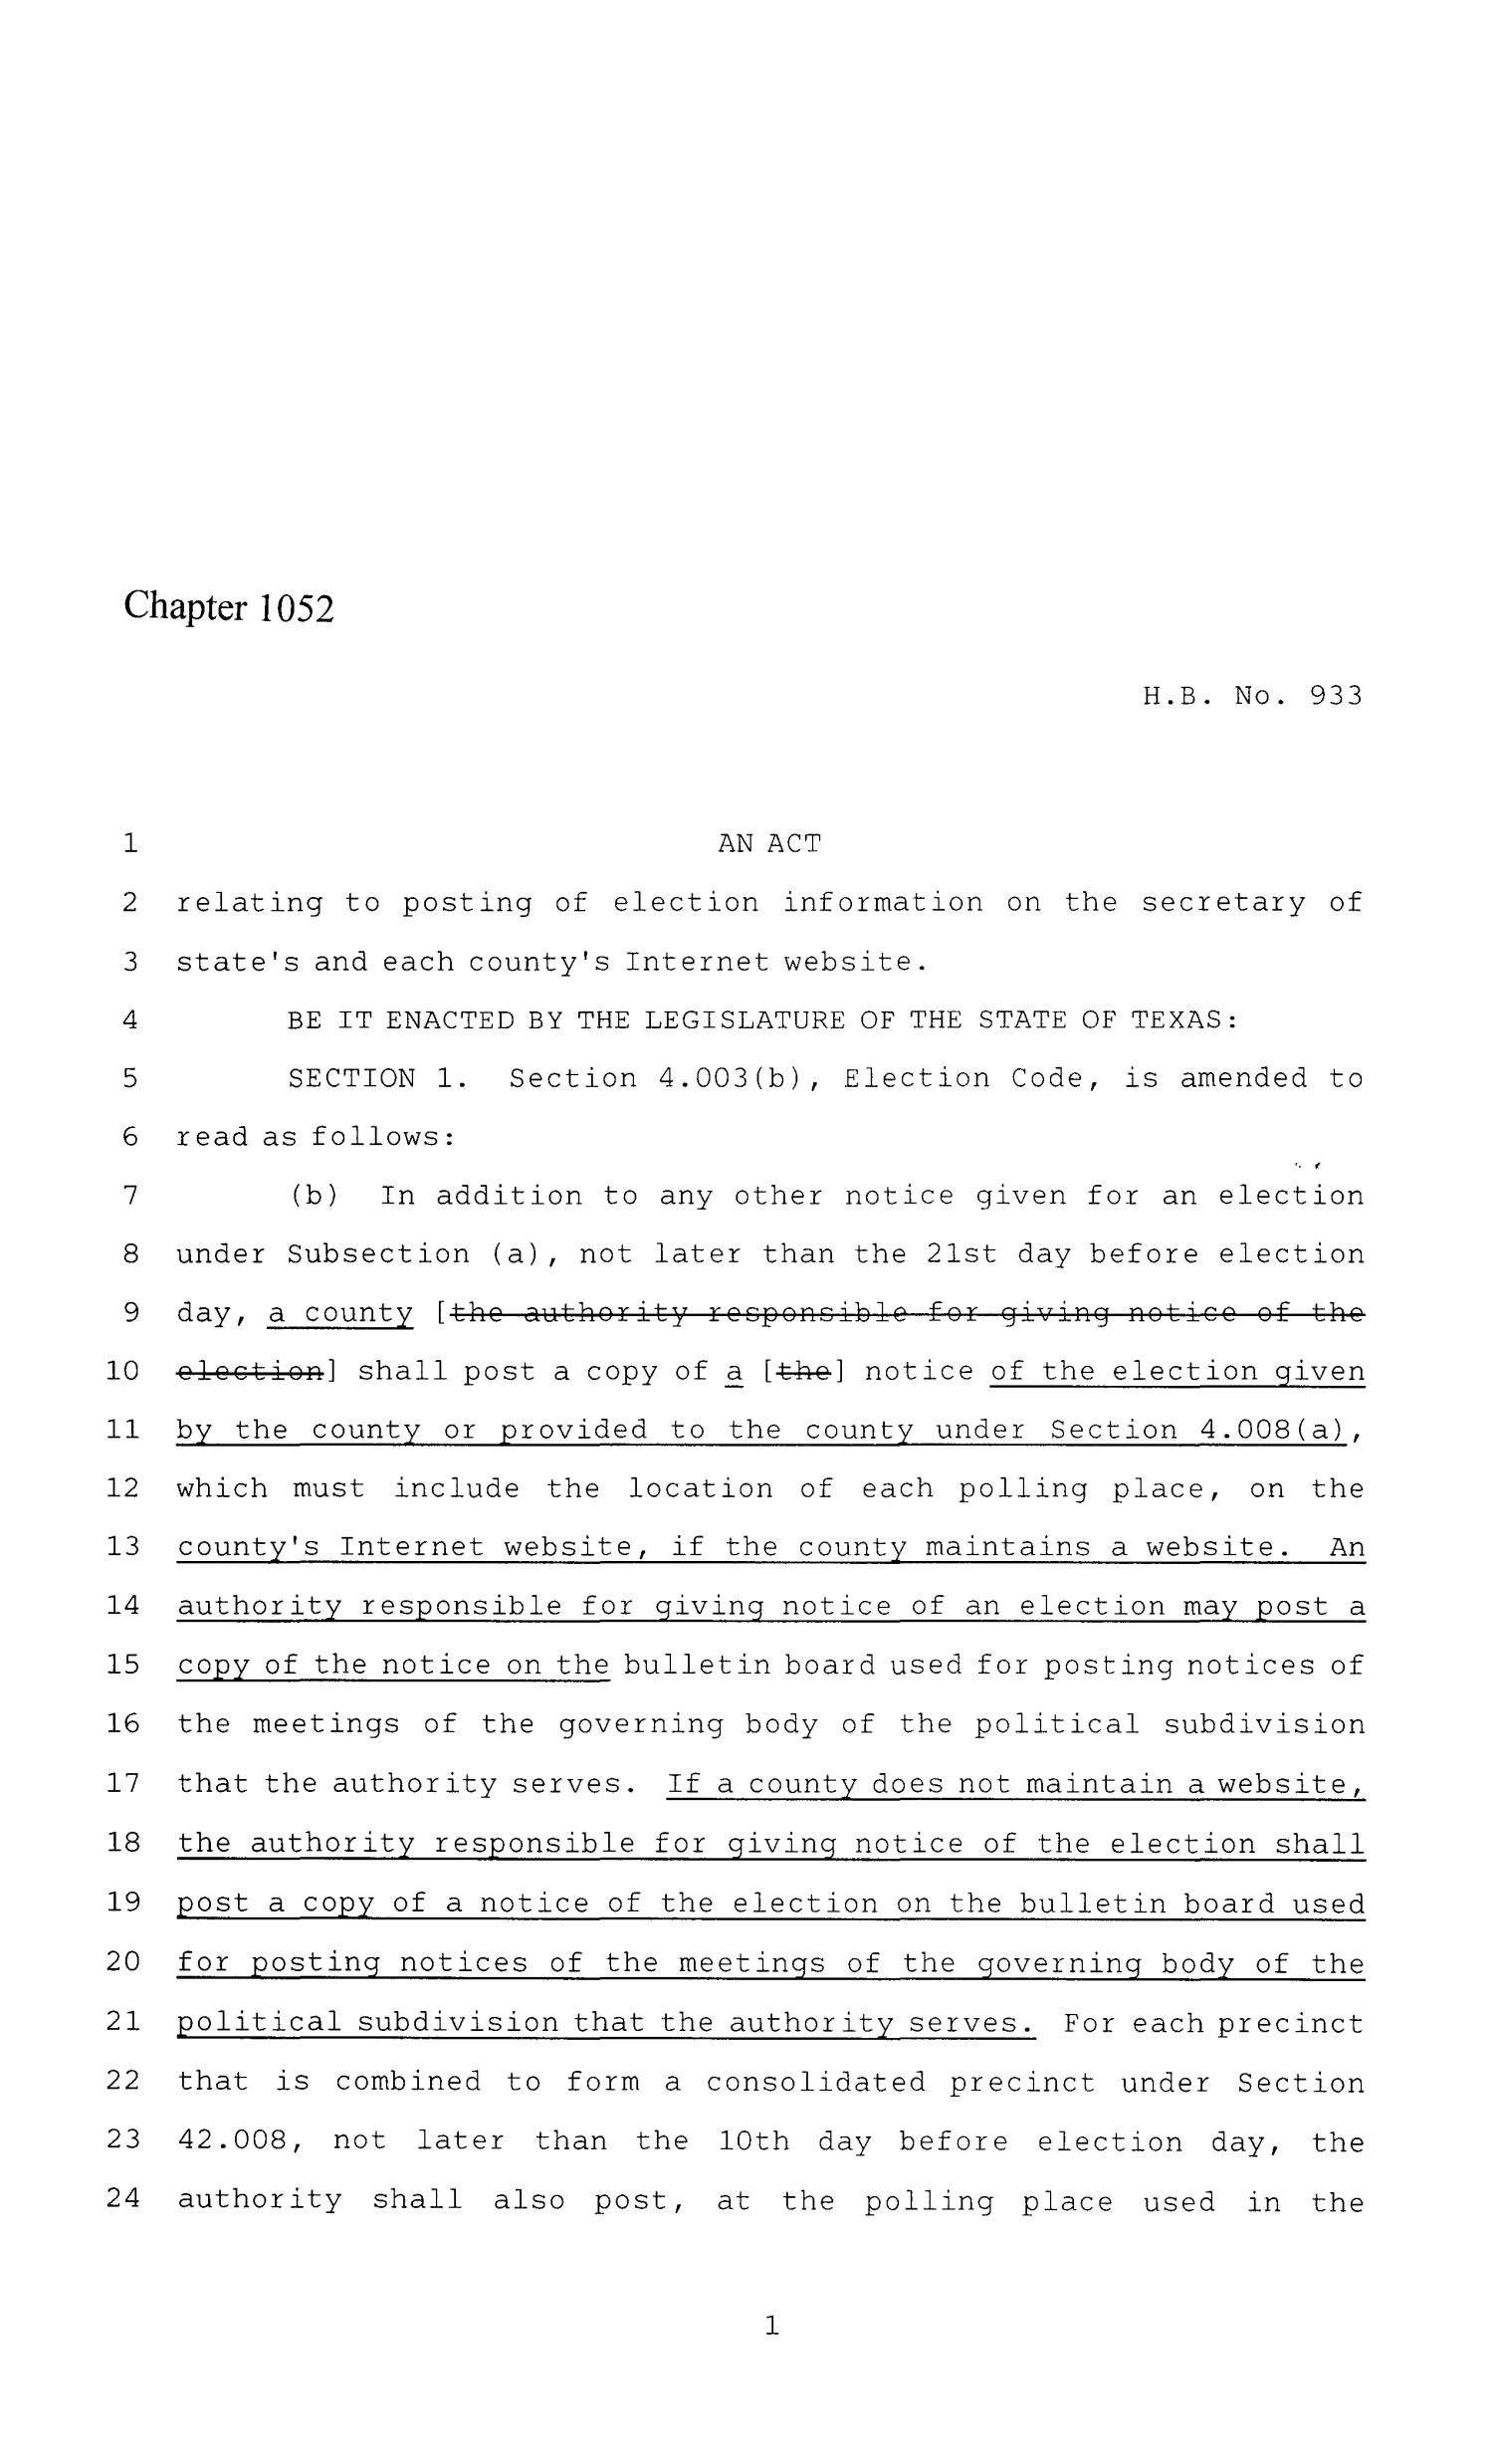 86th Texas Legislature, Regular Session, House Bill 933, Chapter 1052
                                                
                                                    [Sequence #]: 1 of 10
                                                